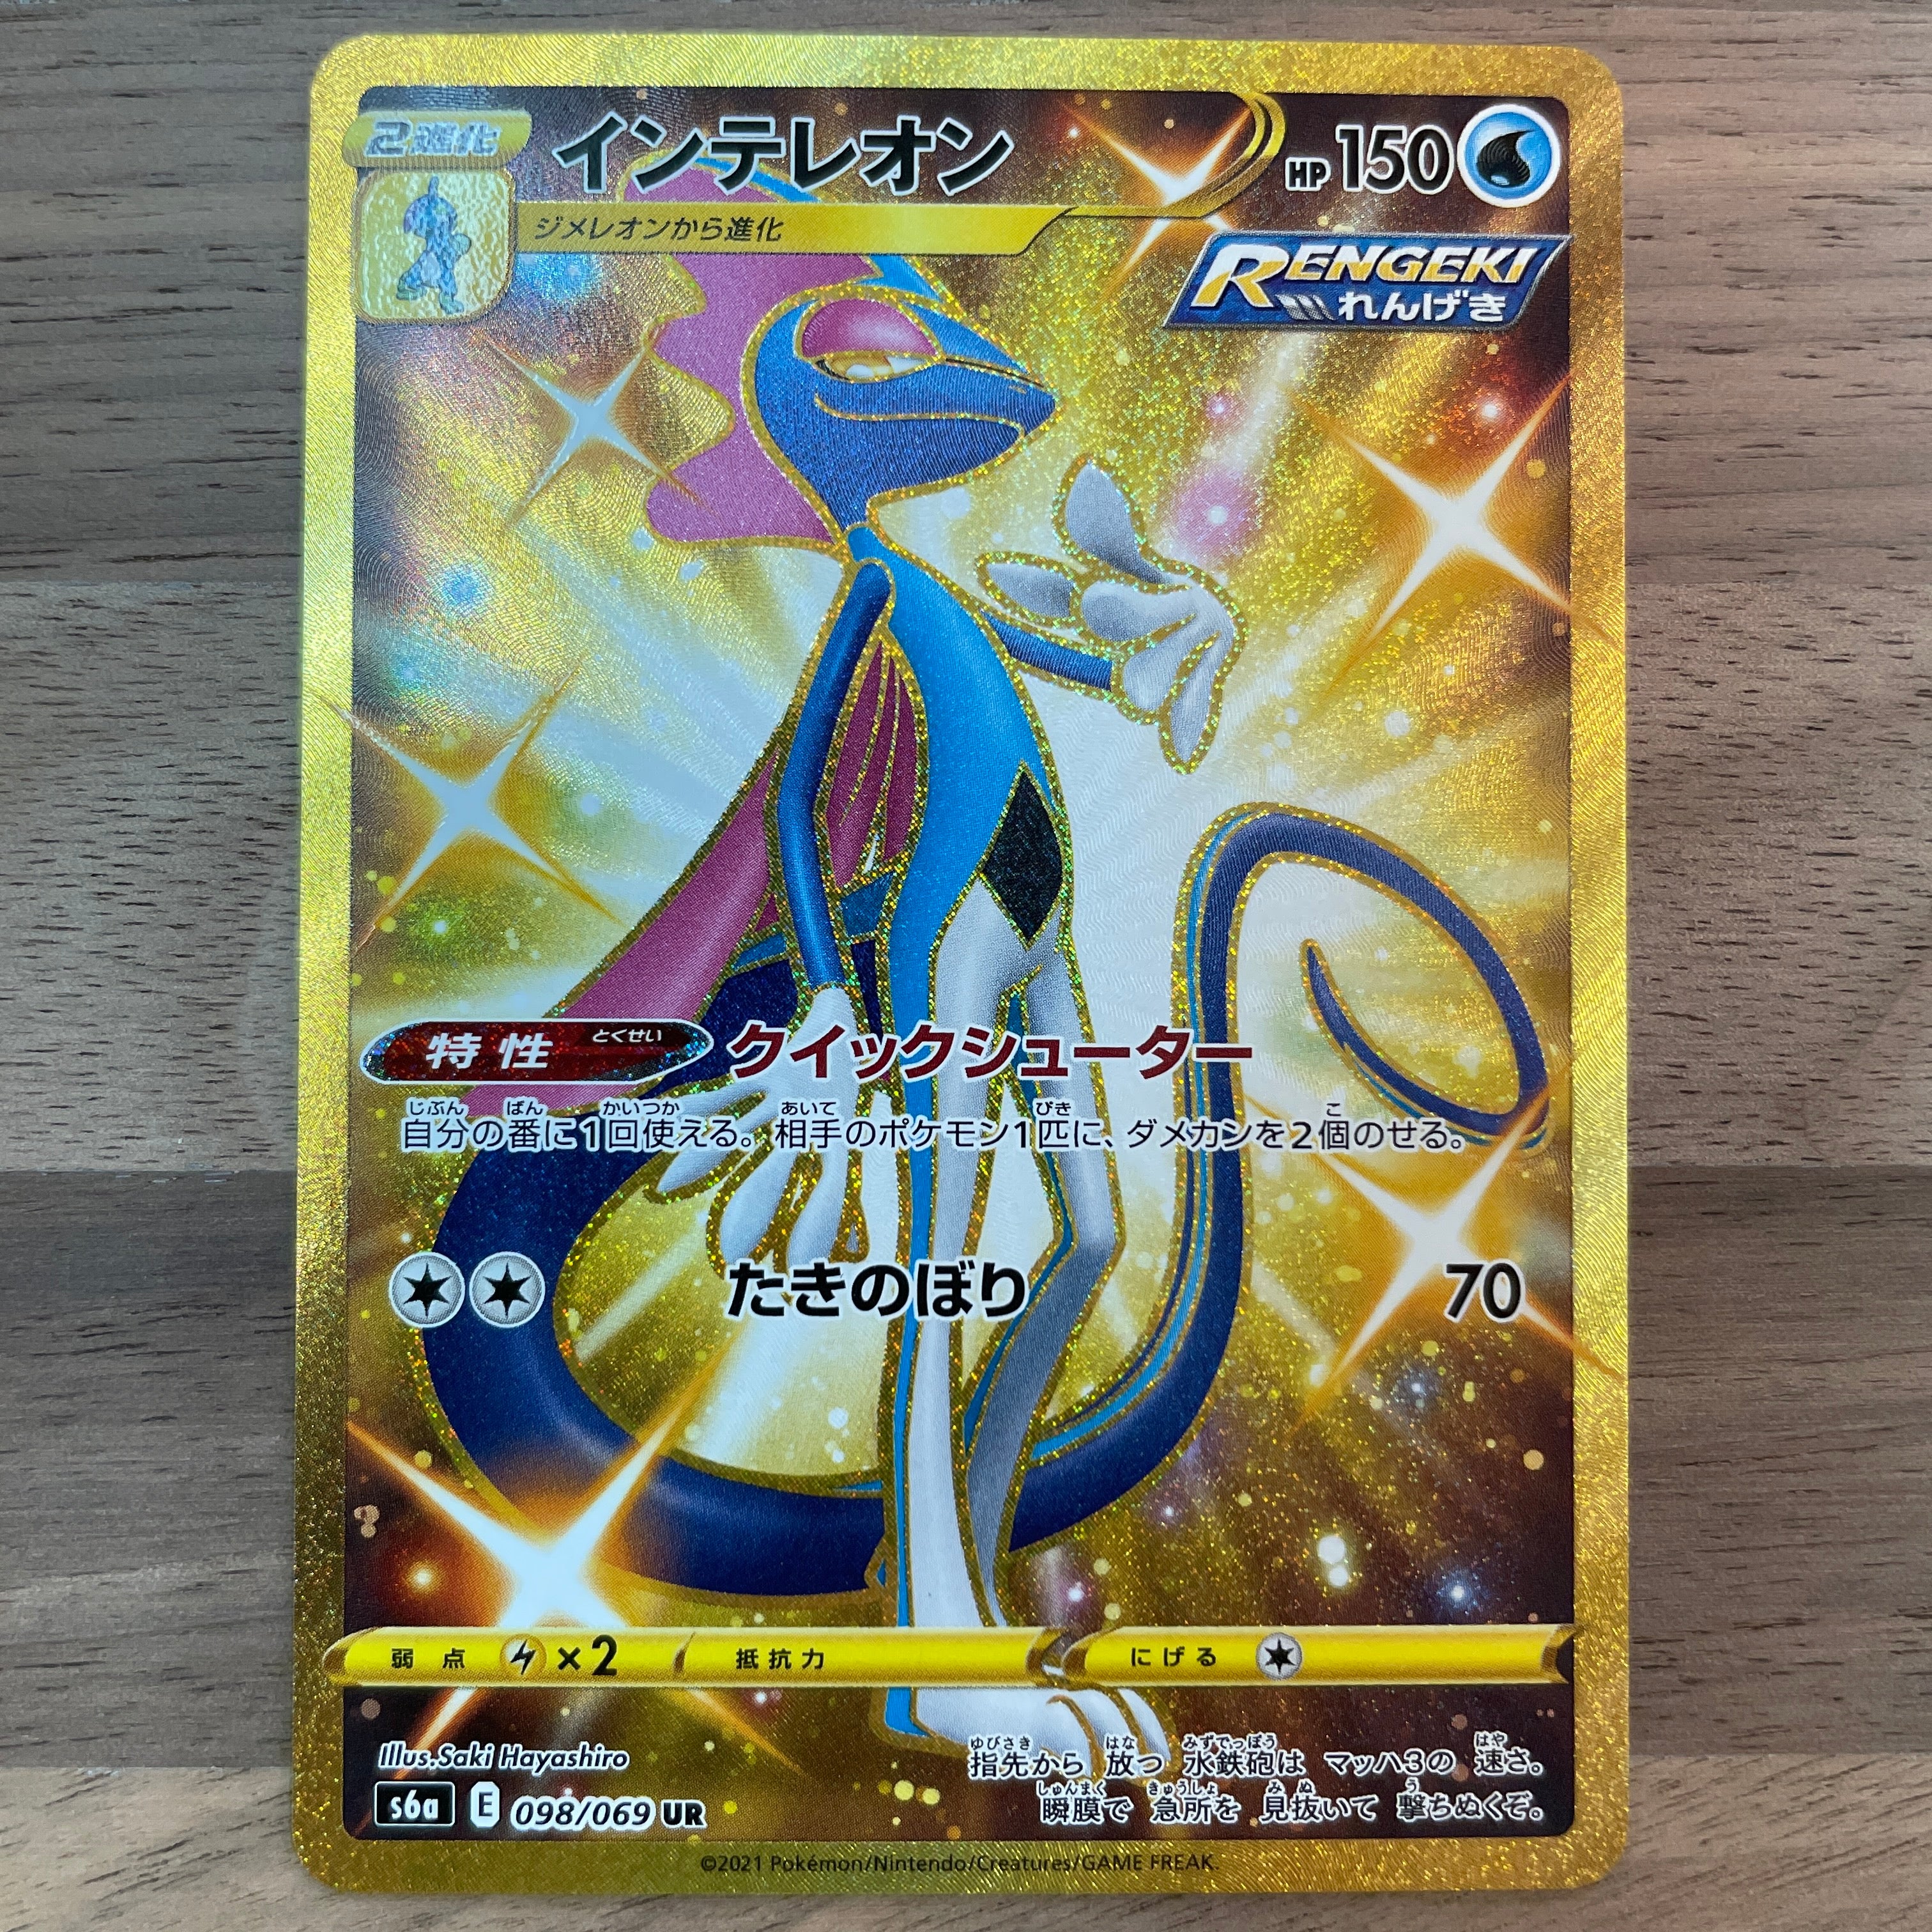 POKÉMON CARD GAME Sword & Shield Expansion pack ｢Eevee Heroes｣  POKÉMON CARD GAME s6a 098/069 Ultra Rare card  Inteleon